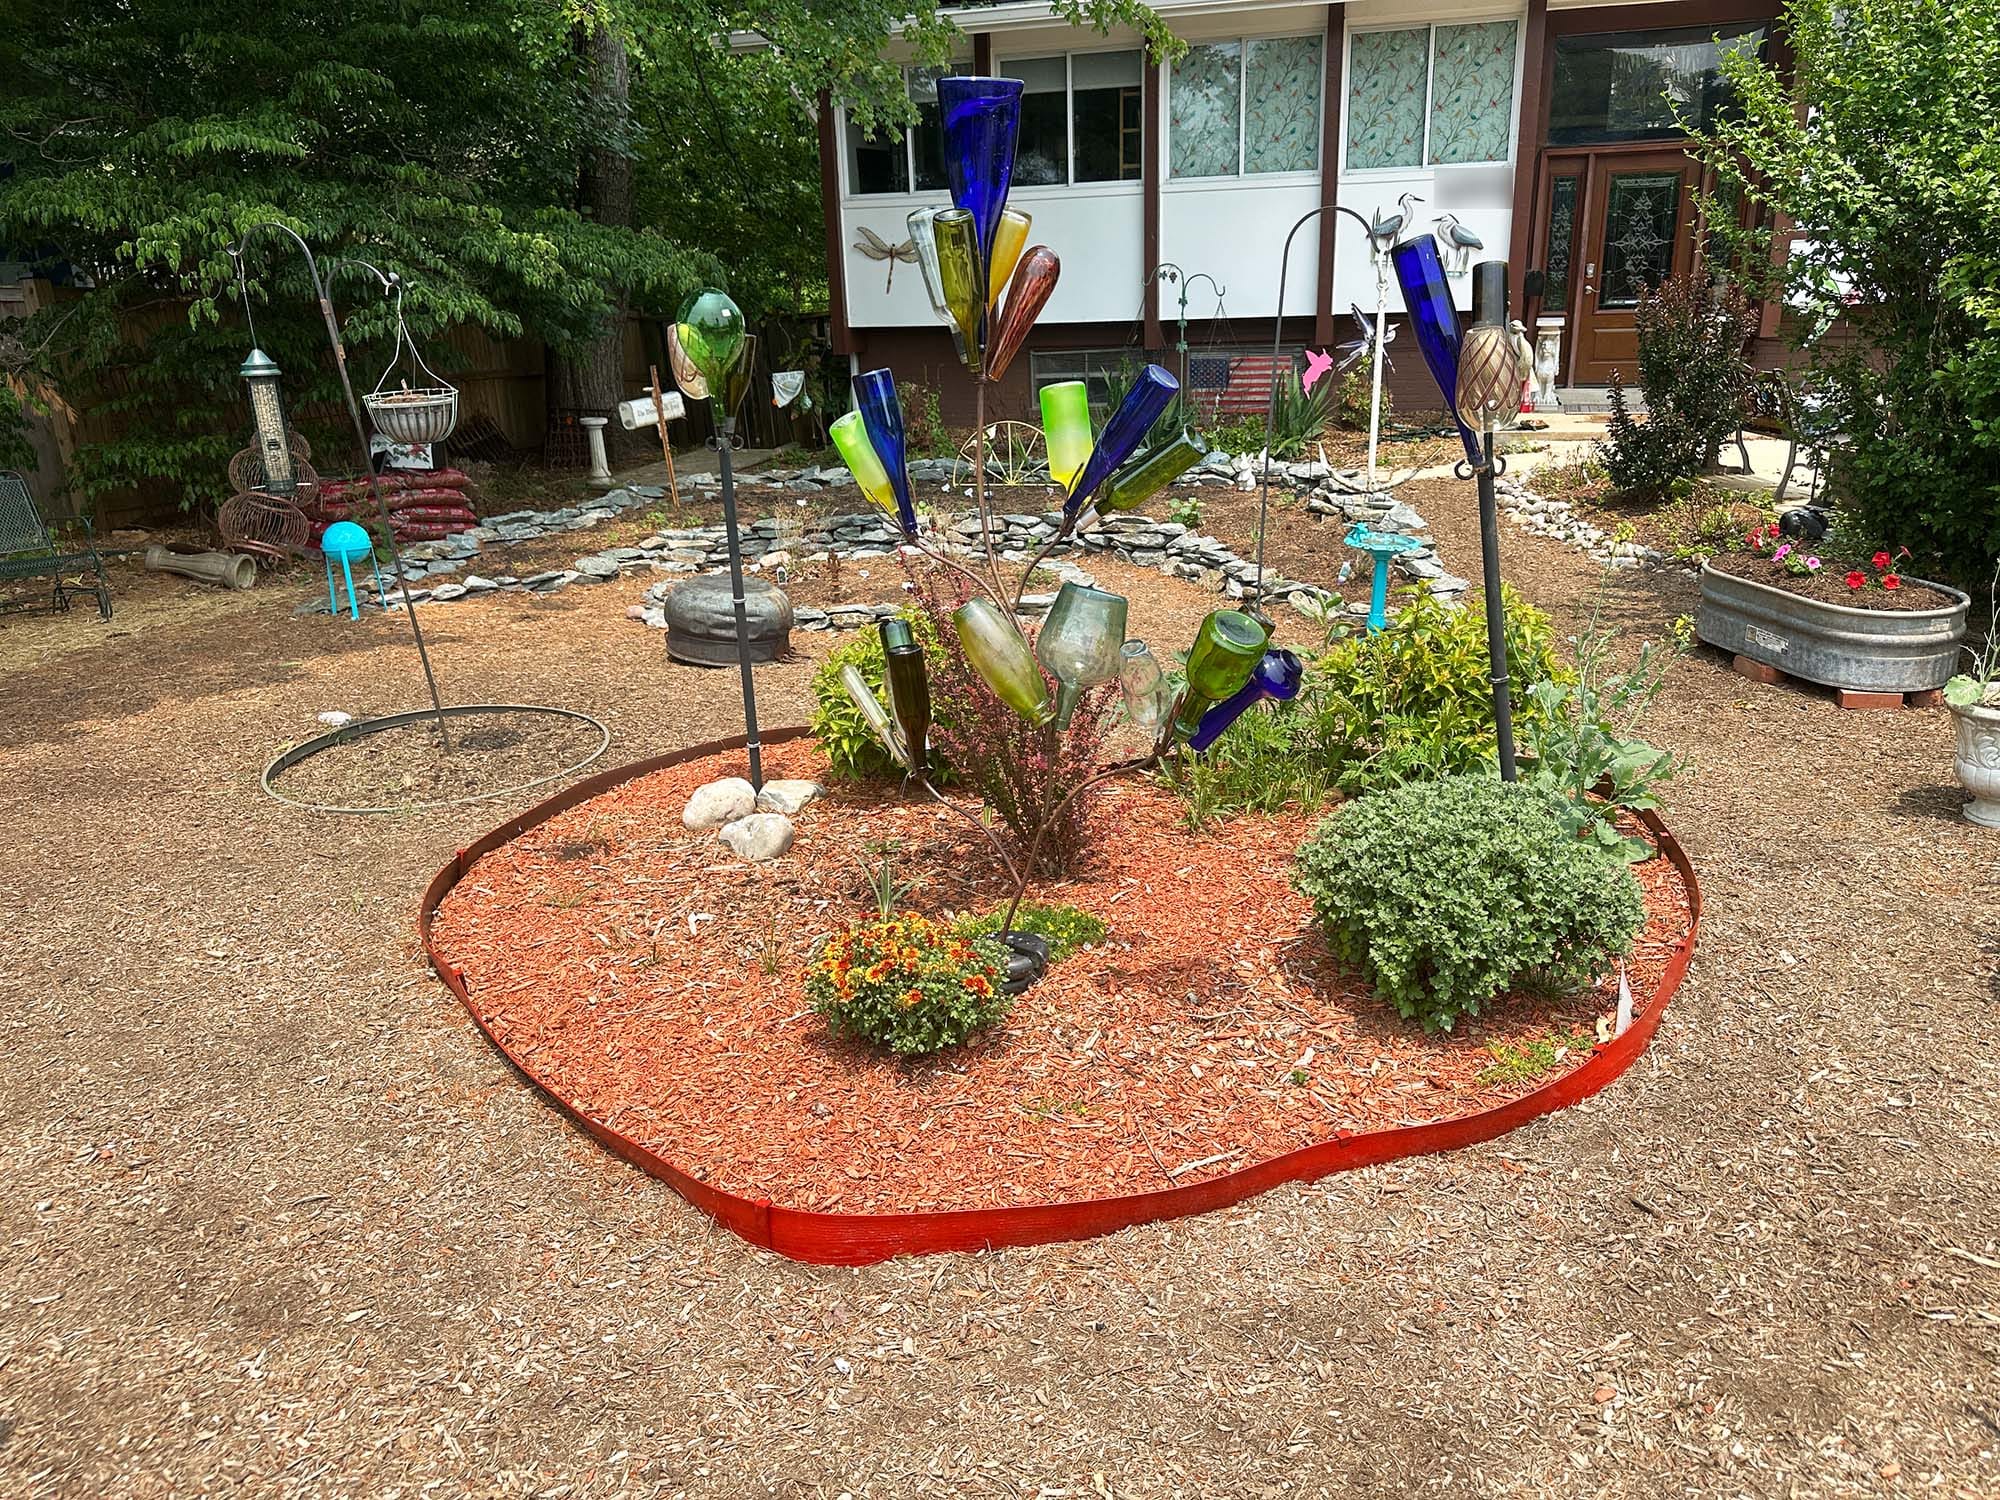 A garden bed outlined in red, filled with plants and a bottle sculpture and surrounded by wood-chip mulch